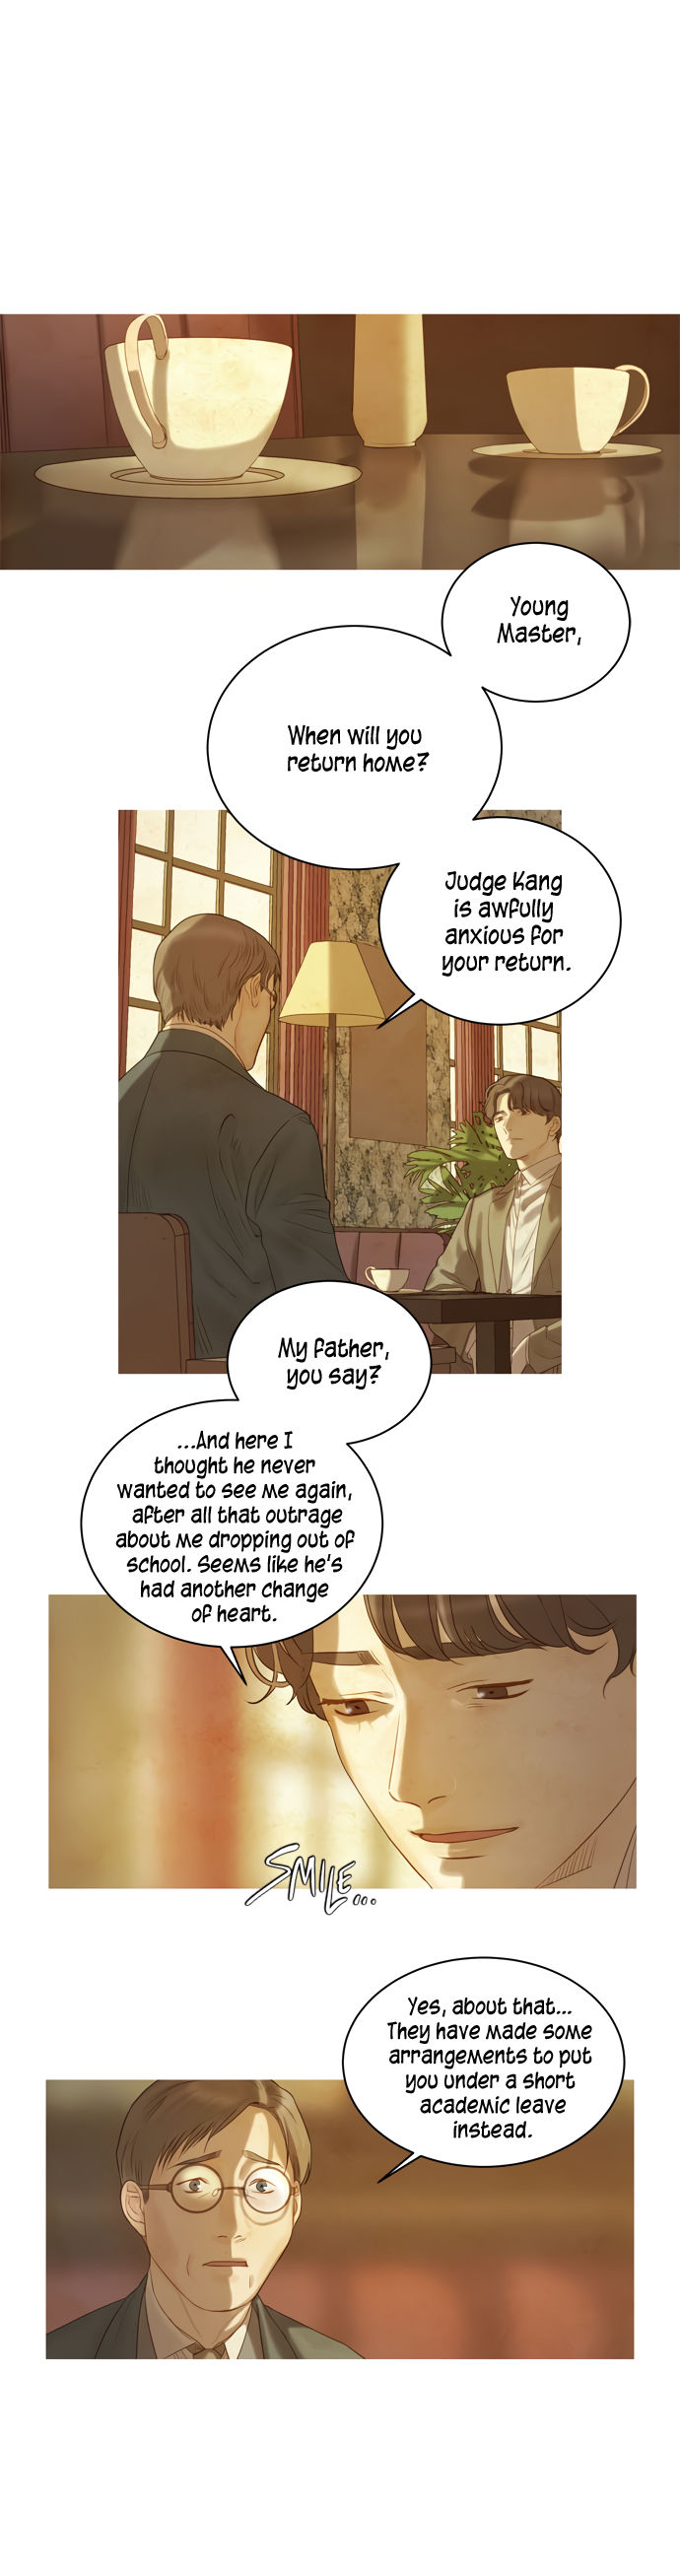 Gorae Byul - The Gyeongseong Mermaid - Chapter 17 Page 5